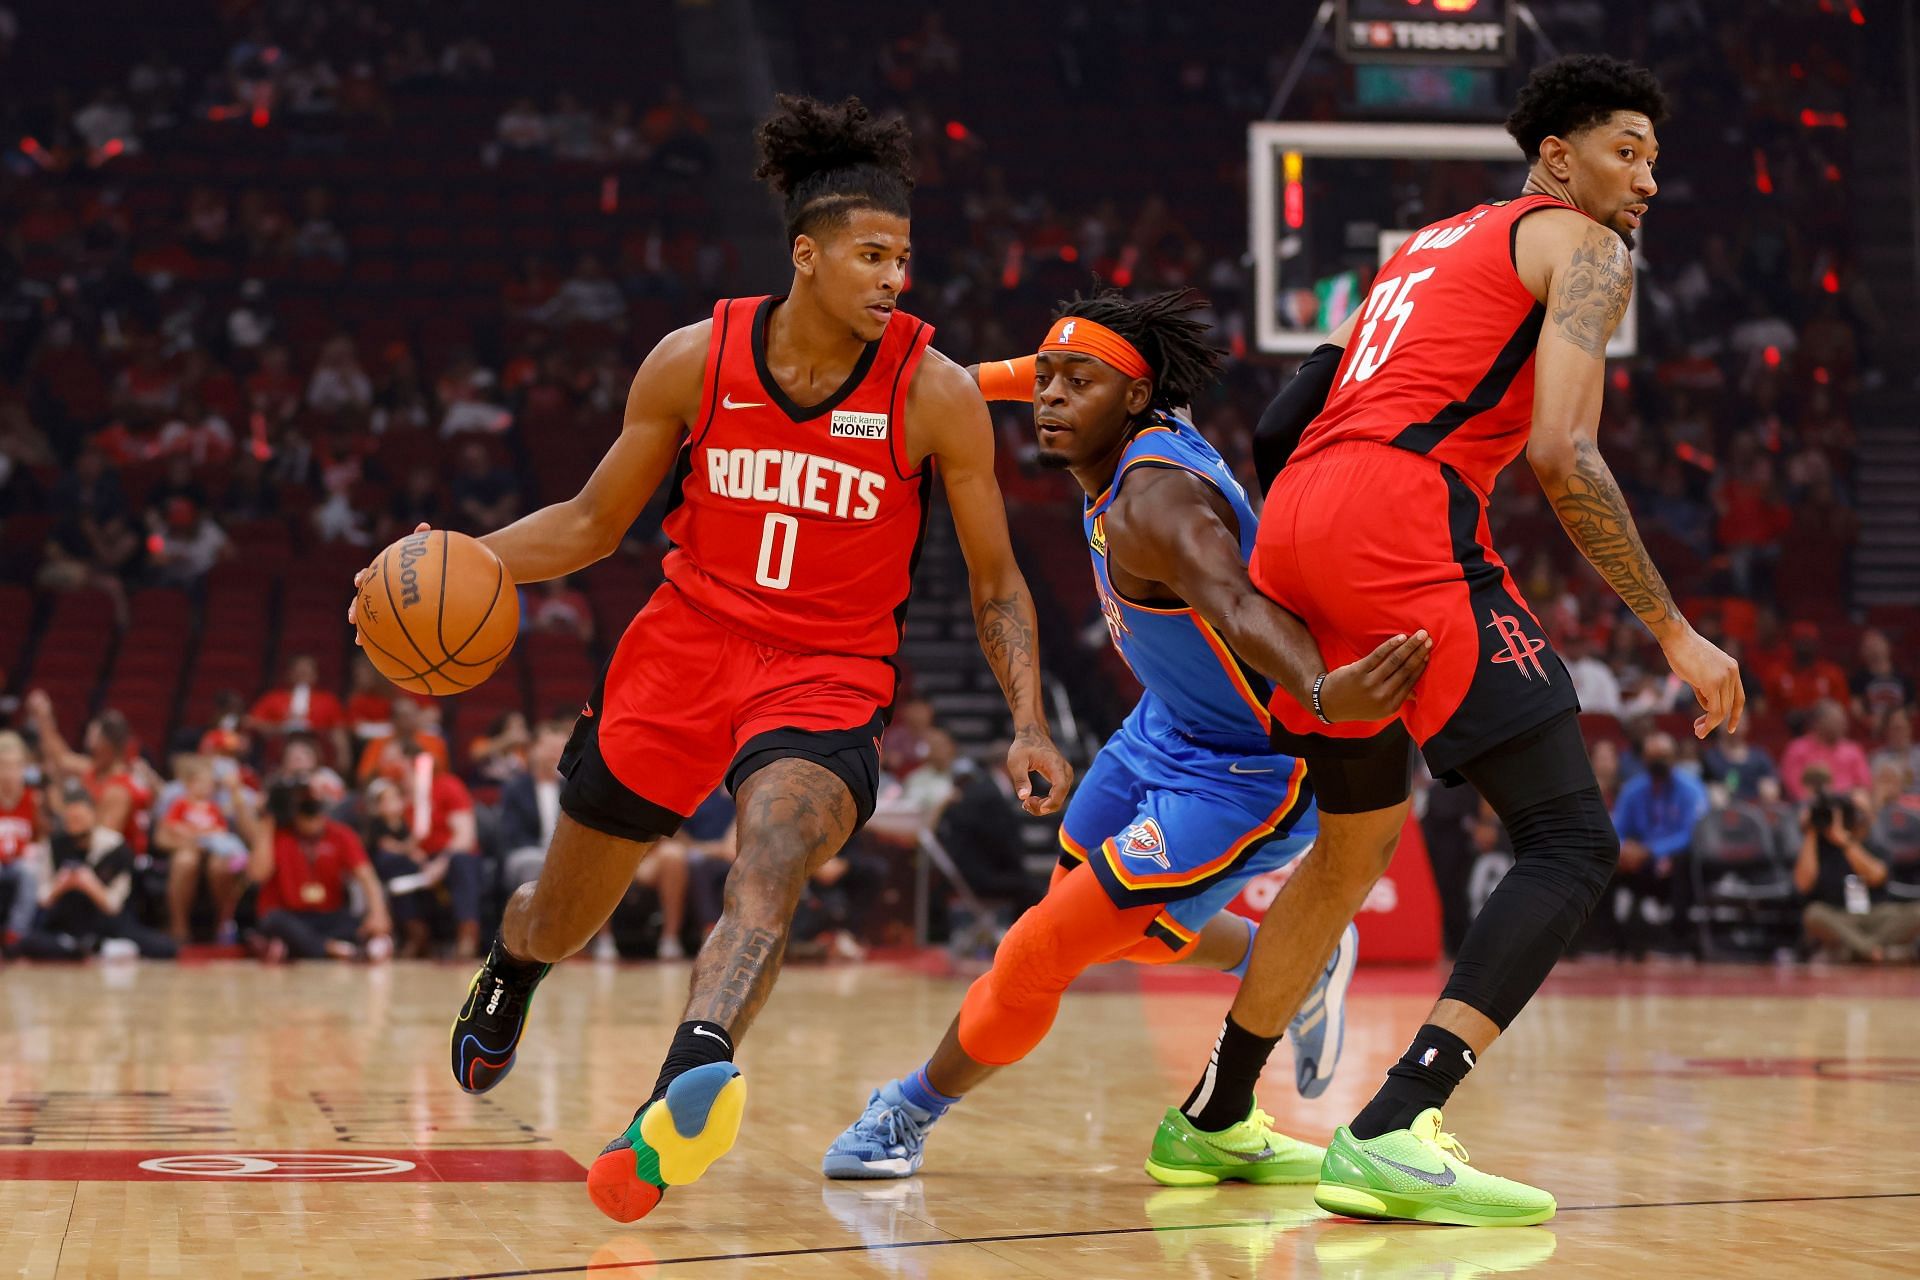 The Houston Rockets are coming off a win over the Oklahoma City Thunder.